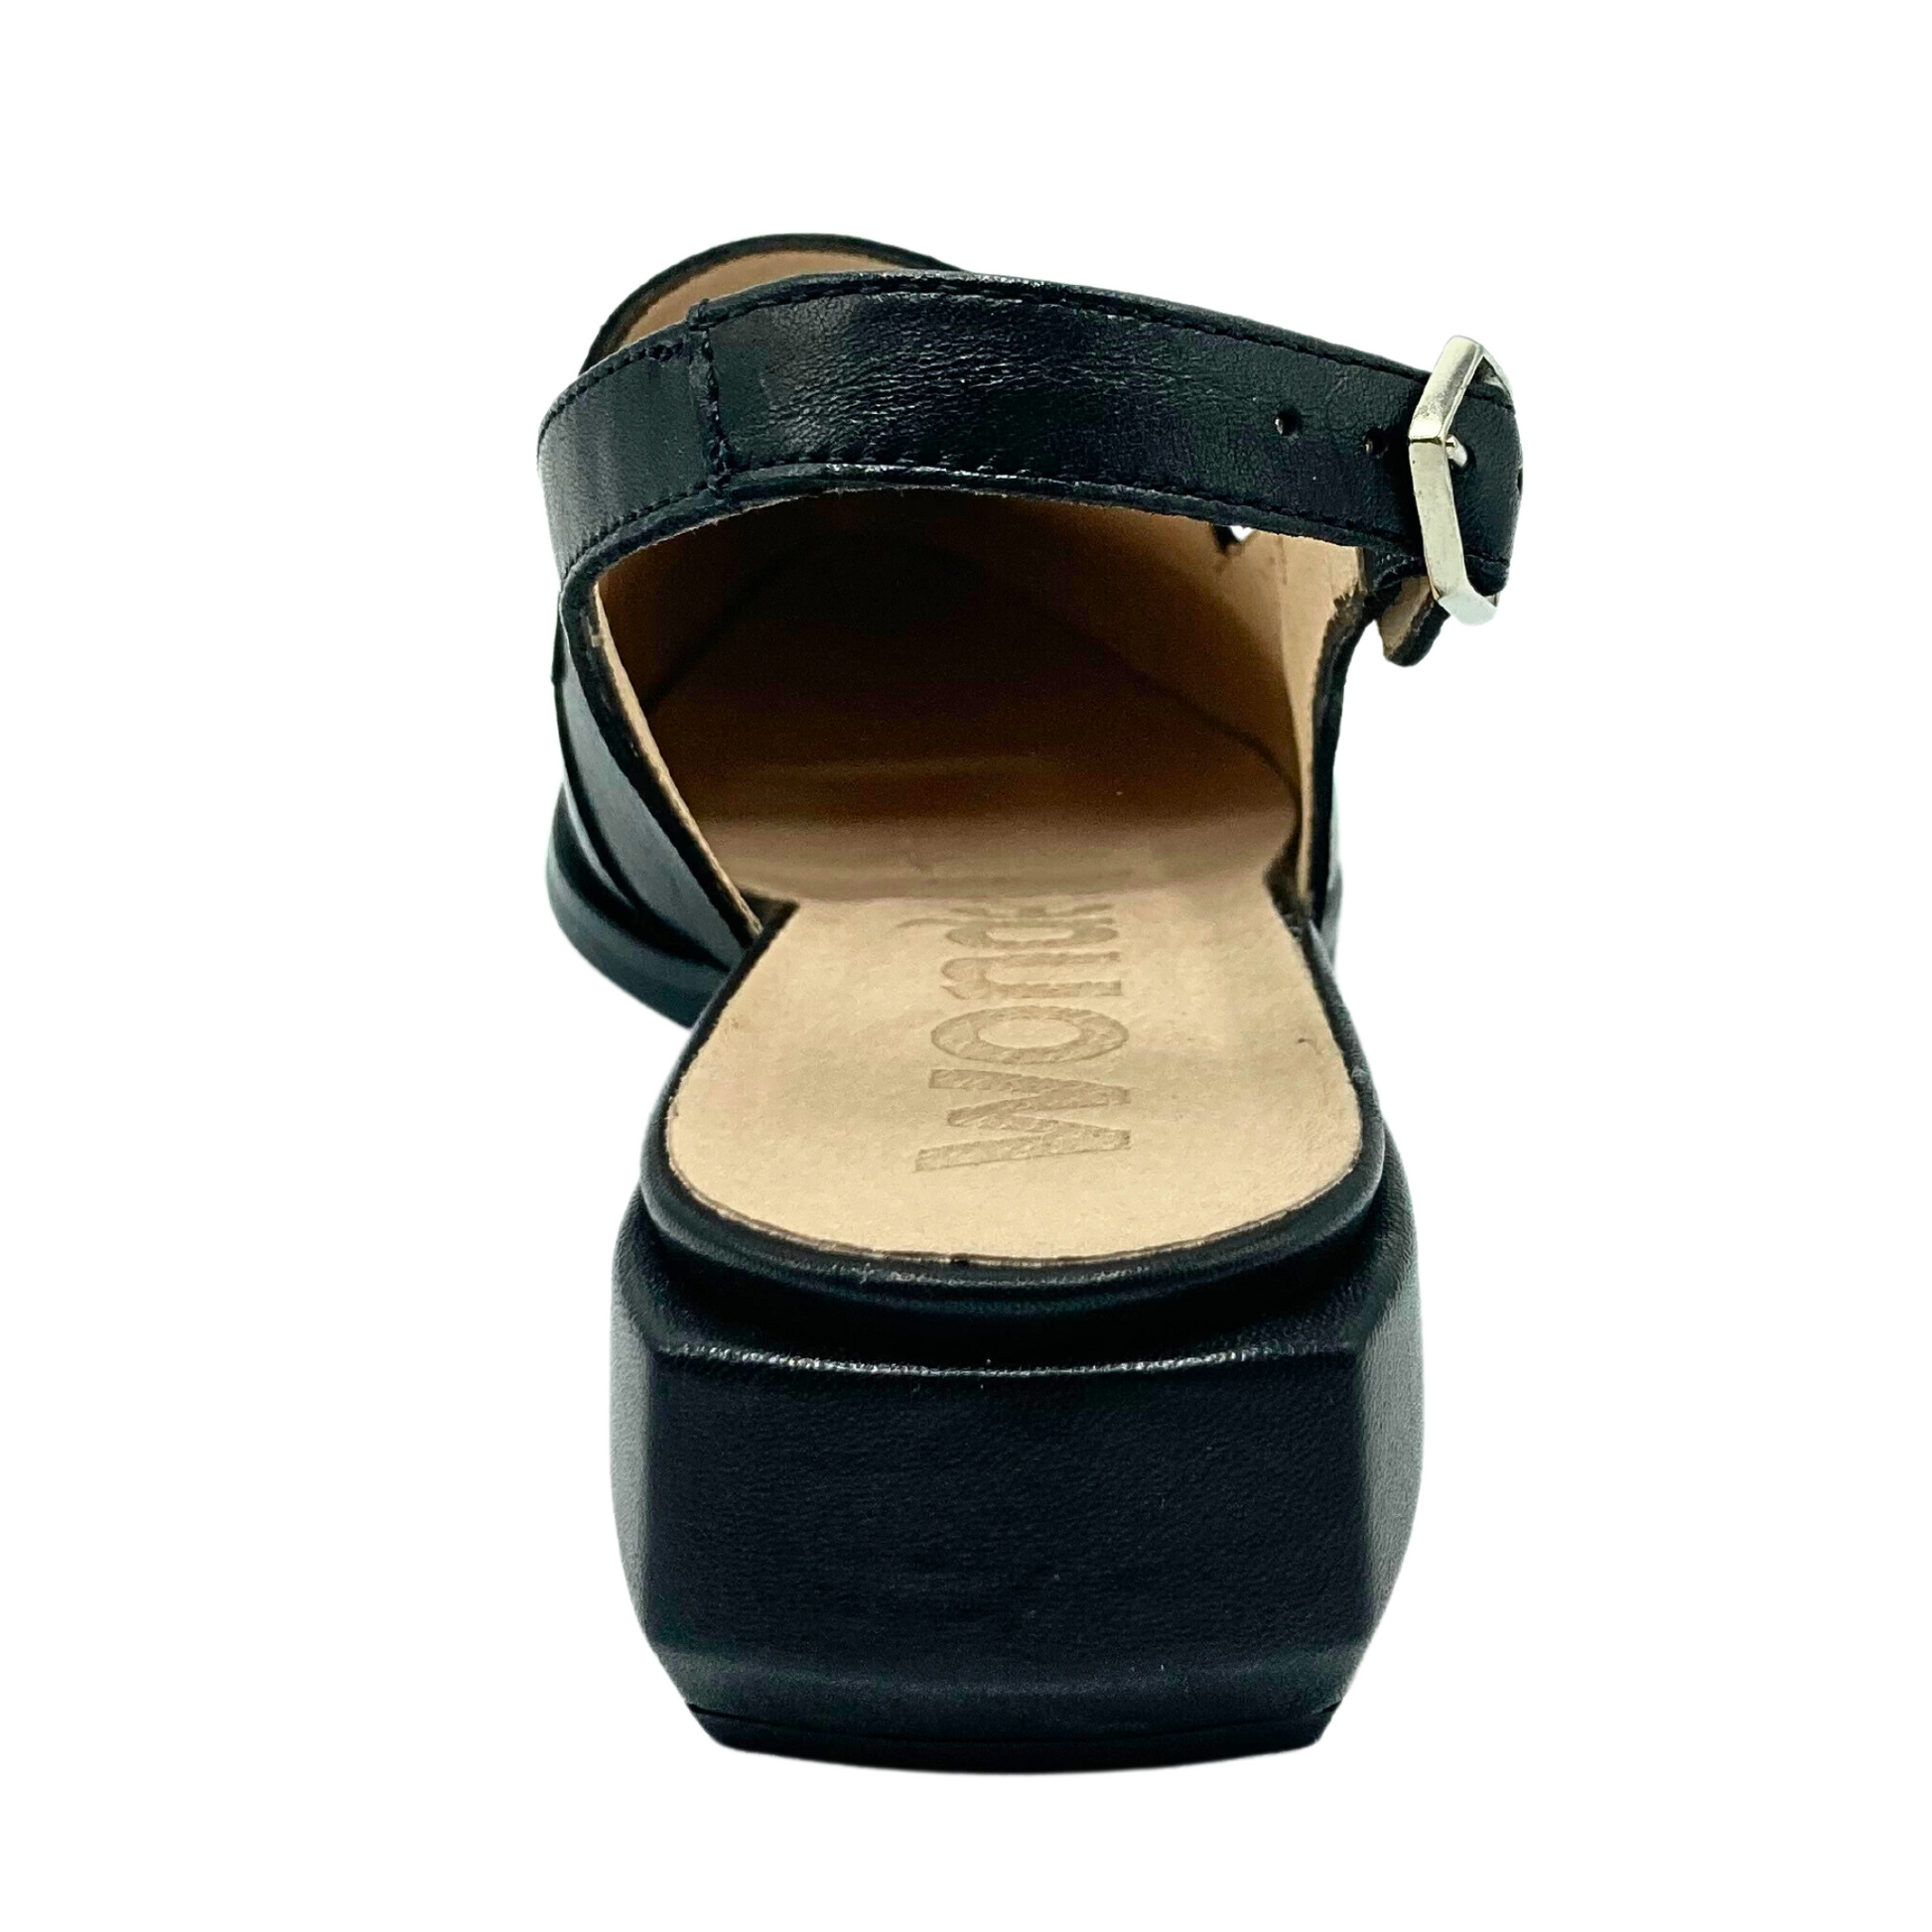 Rear view of the Wonders Malaga slingback loafer in black leather.  Low, square heel 